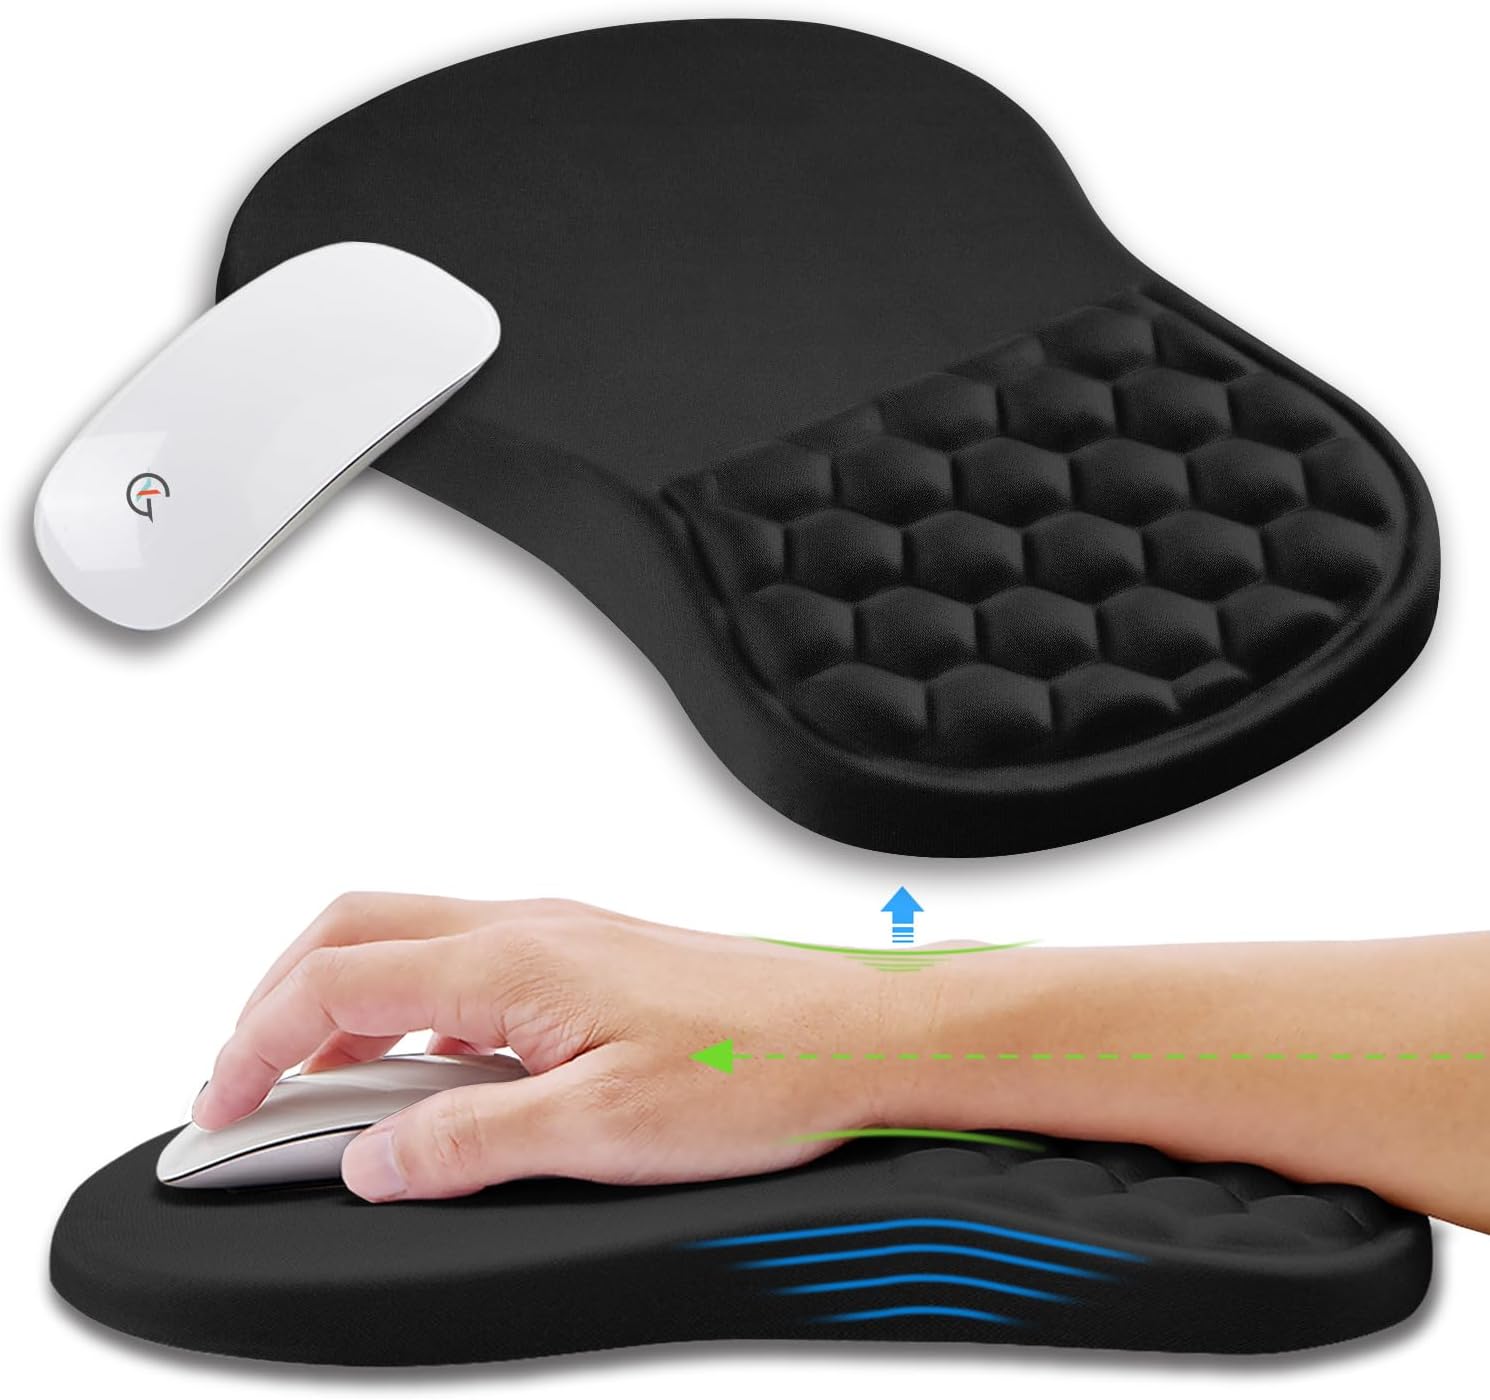 The mouse pad that saved my wrist as a software developer